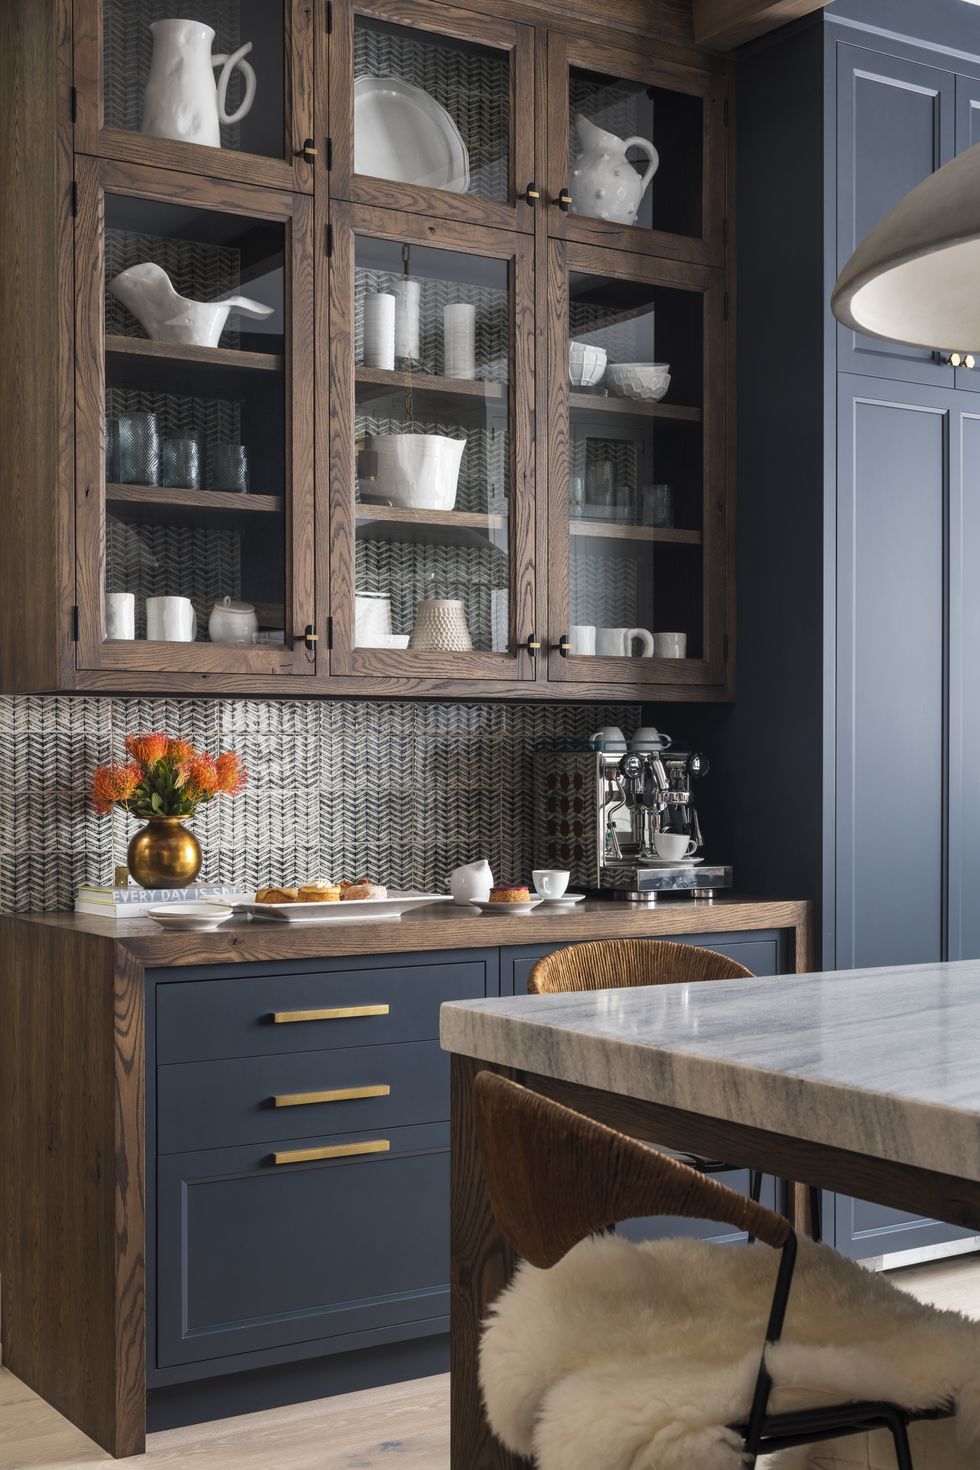 Coffee Mug In Modern Trendy Kitchen With Grey Cupboards And Wood